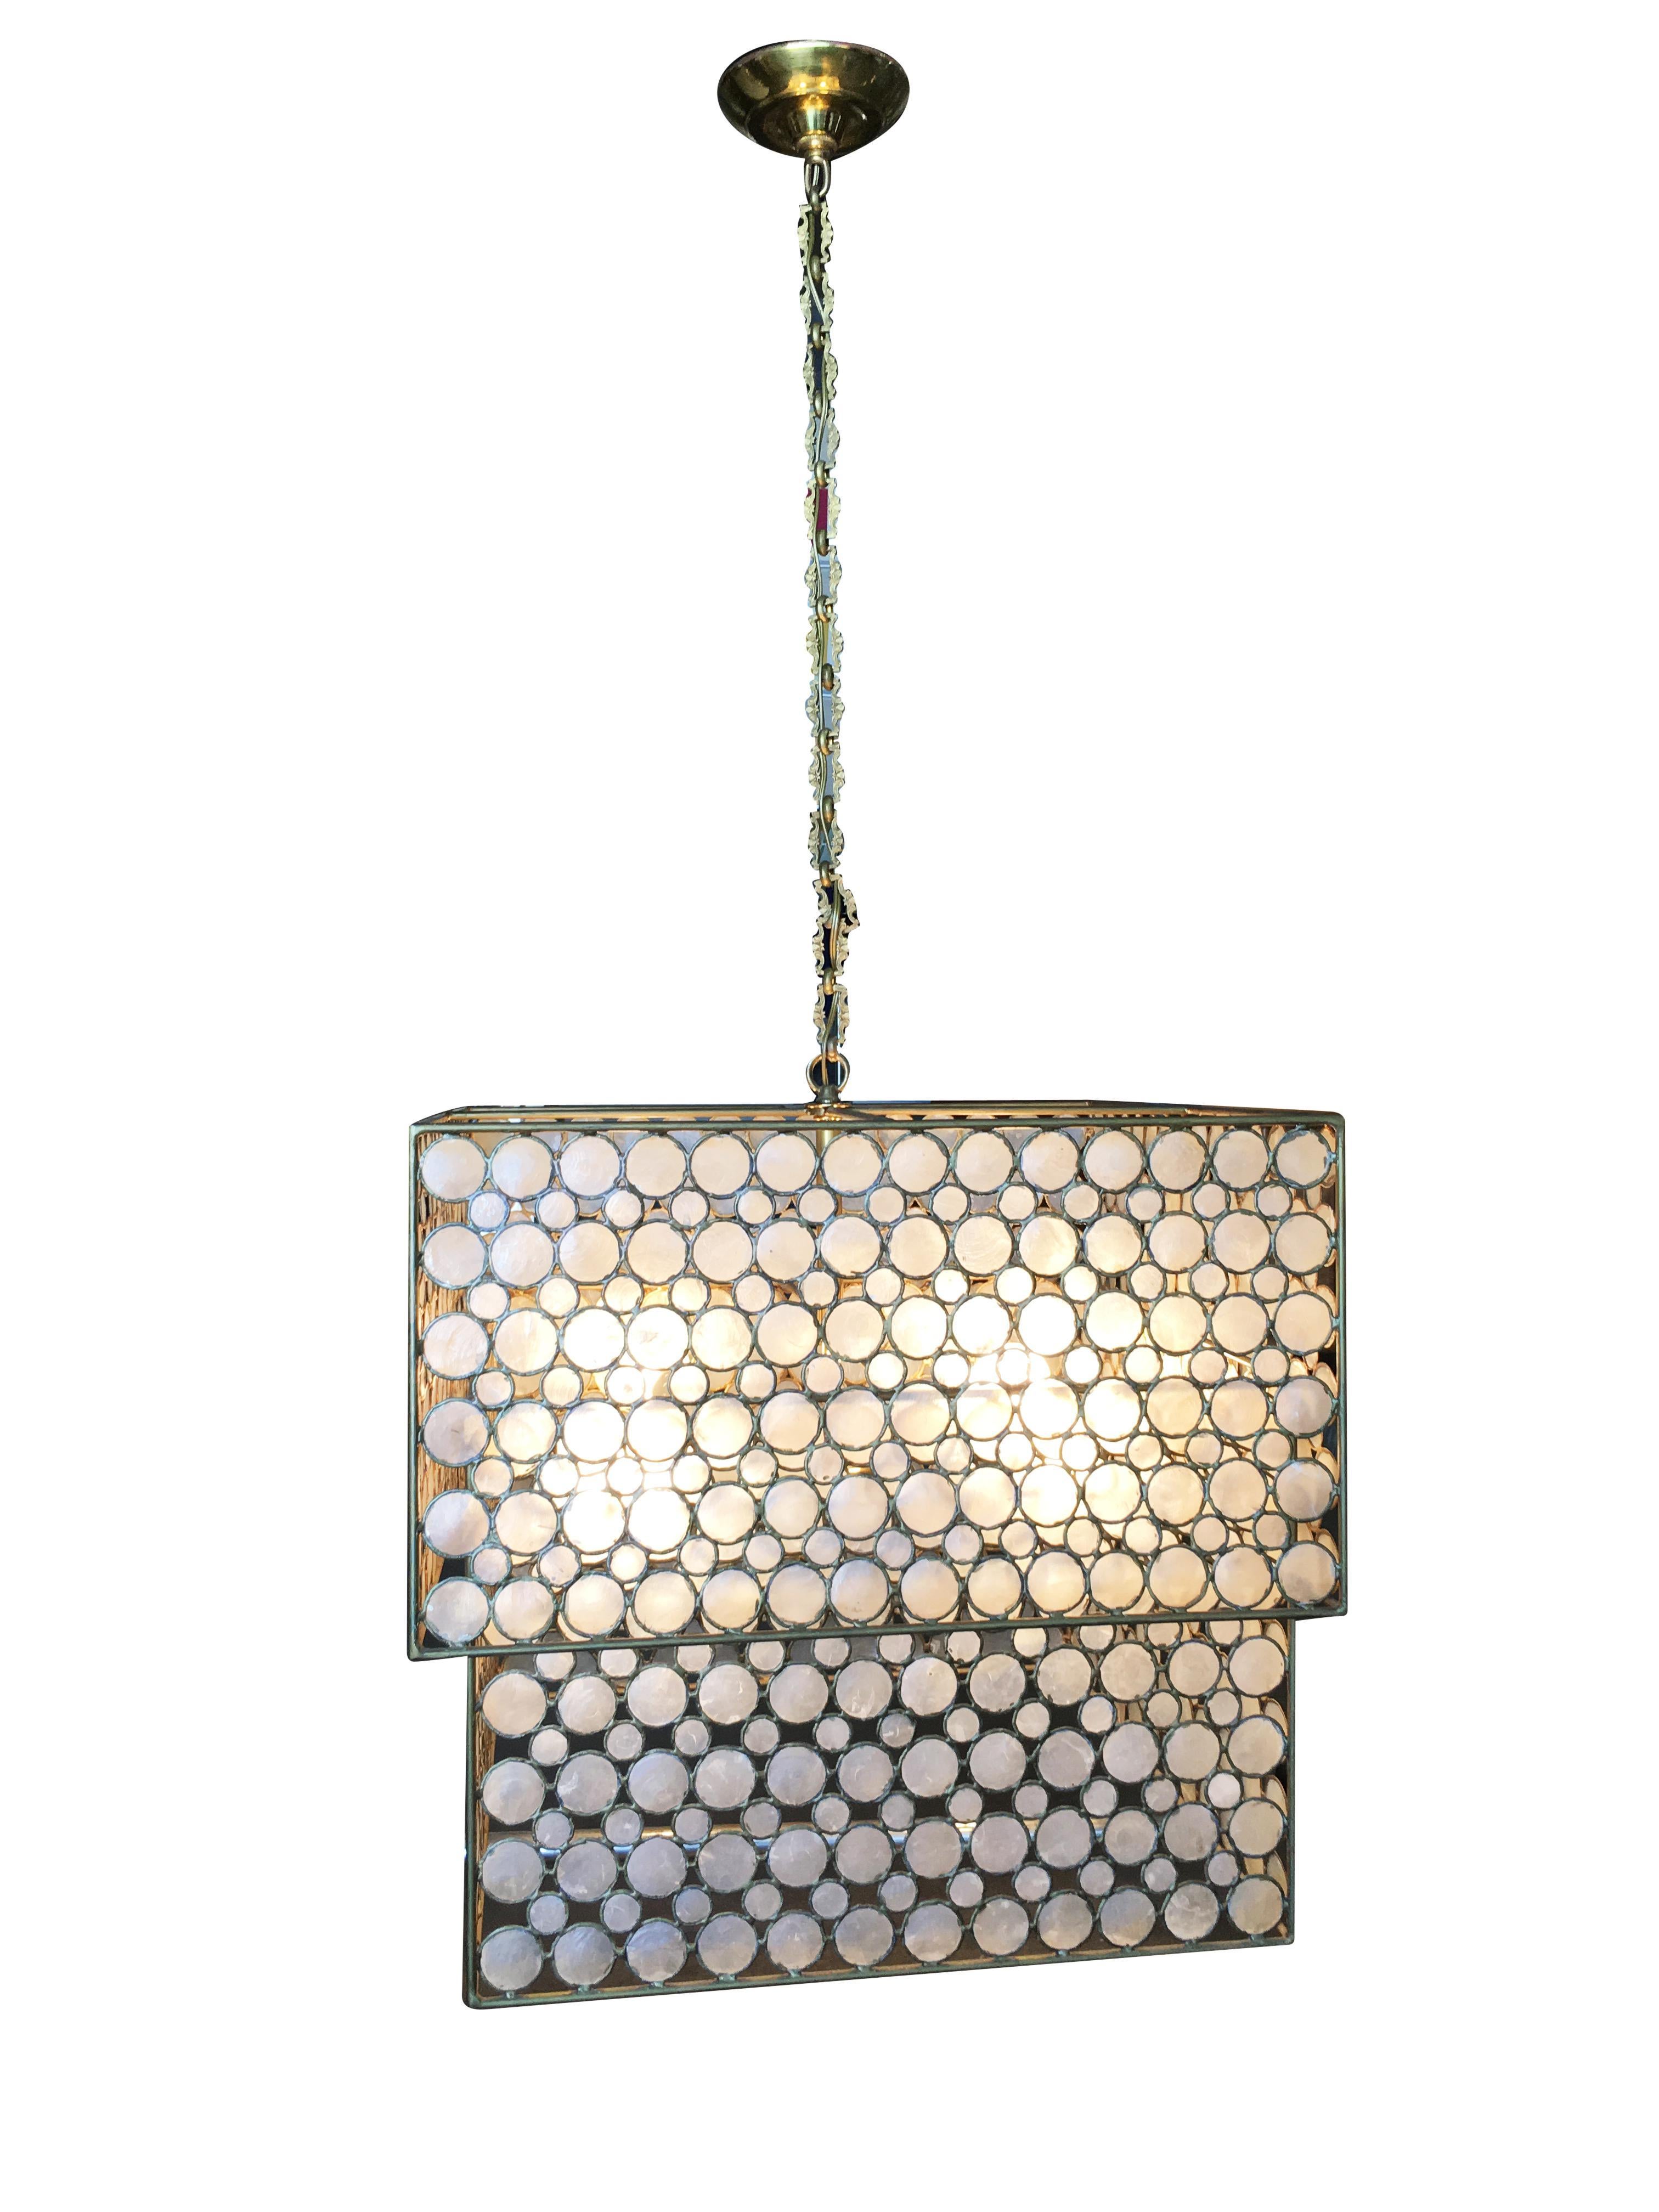 Midcentury style chandelier with double box mother of pearl brass design featuring a 2 brass frames with mother of pearl fronts.

addx1